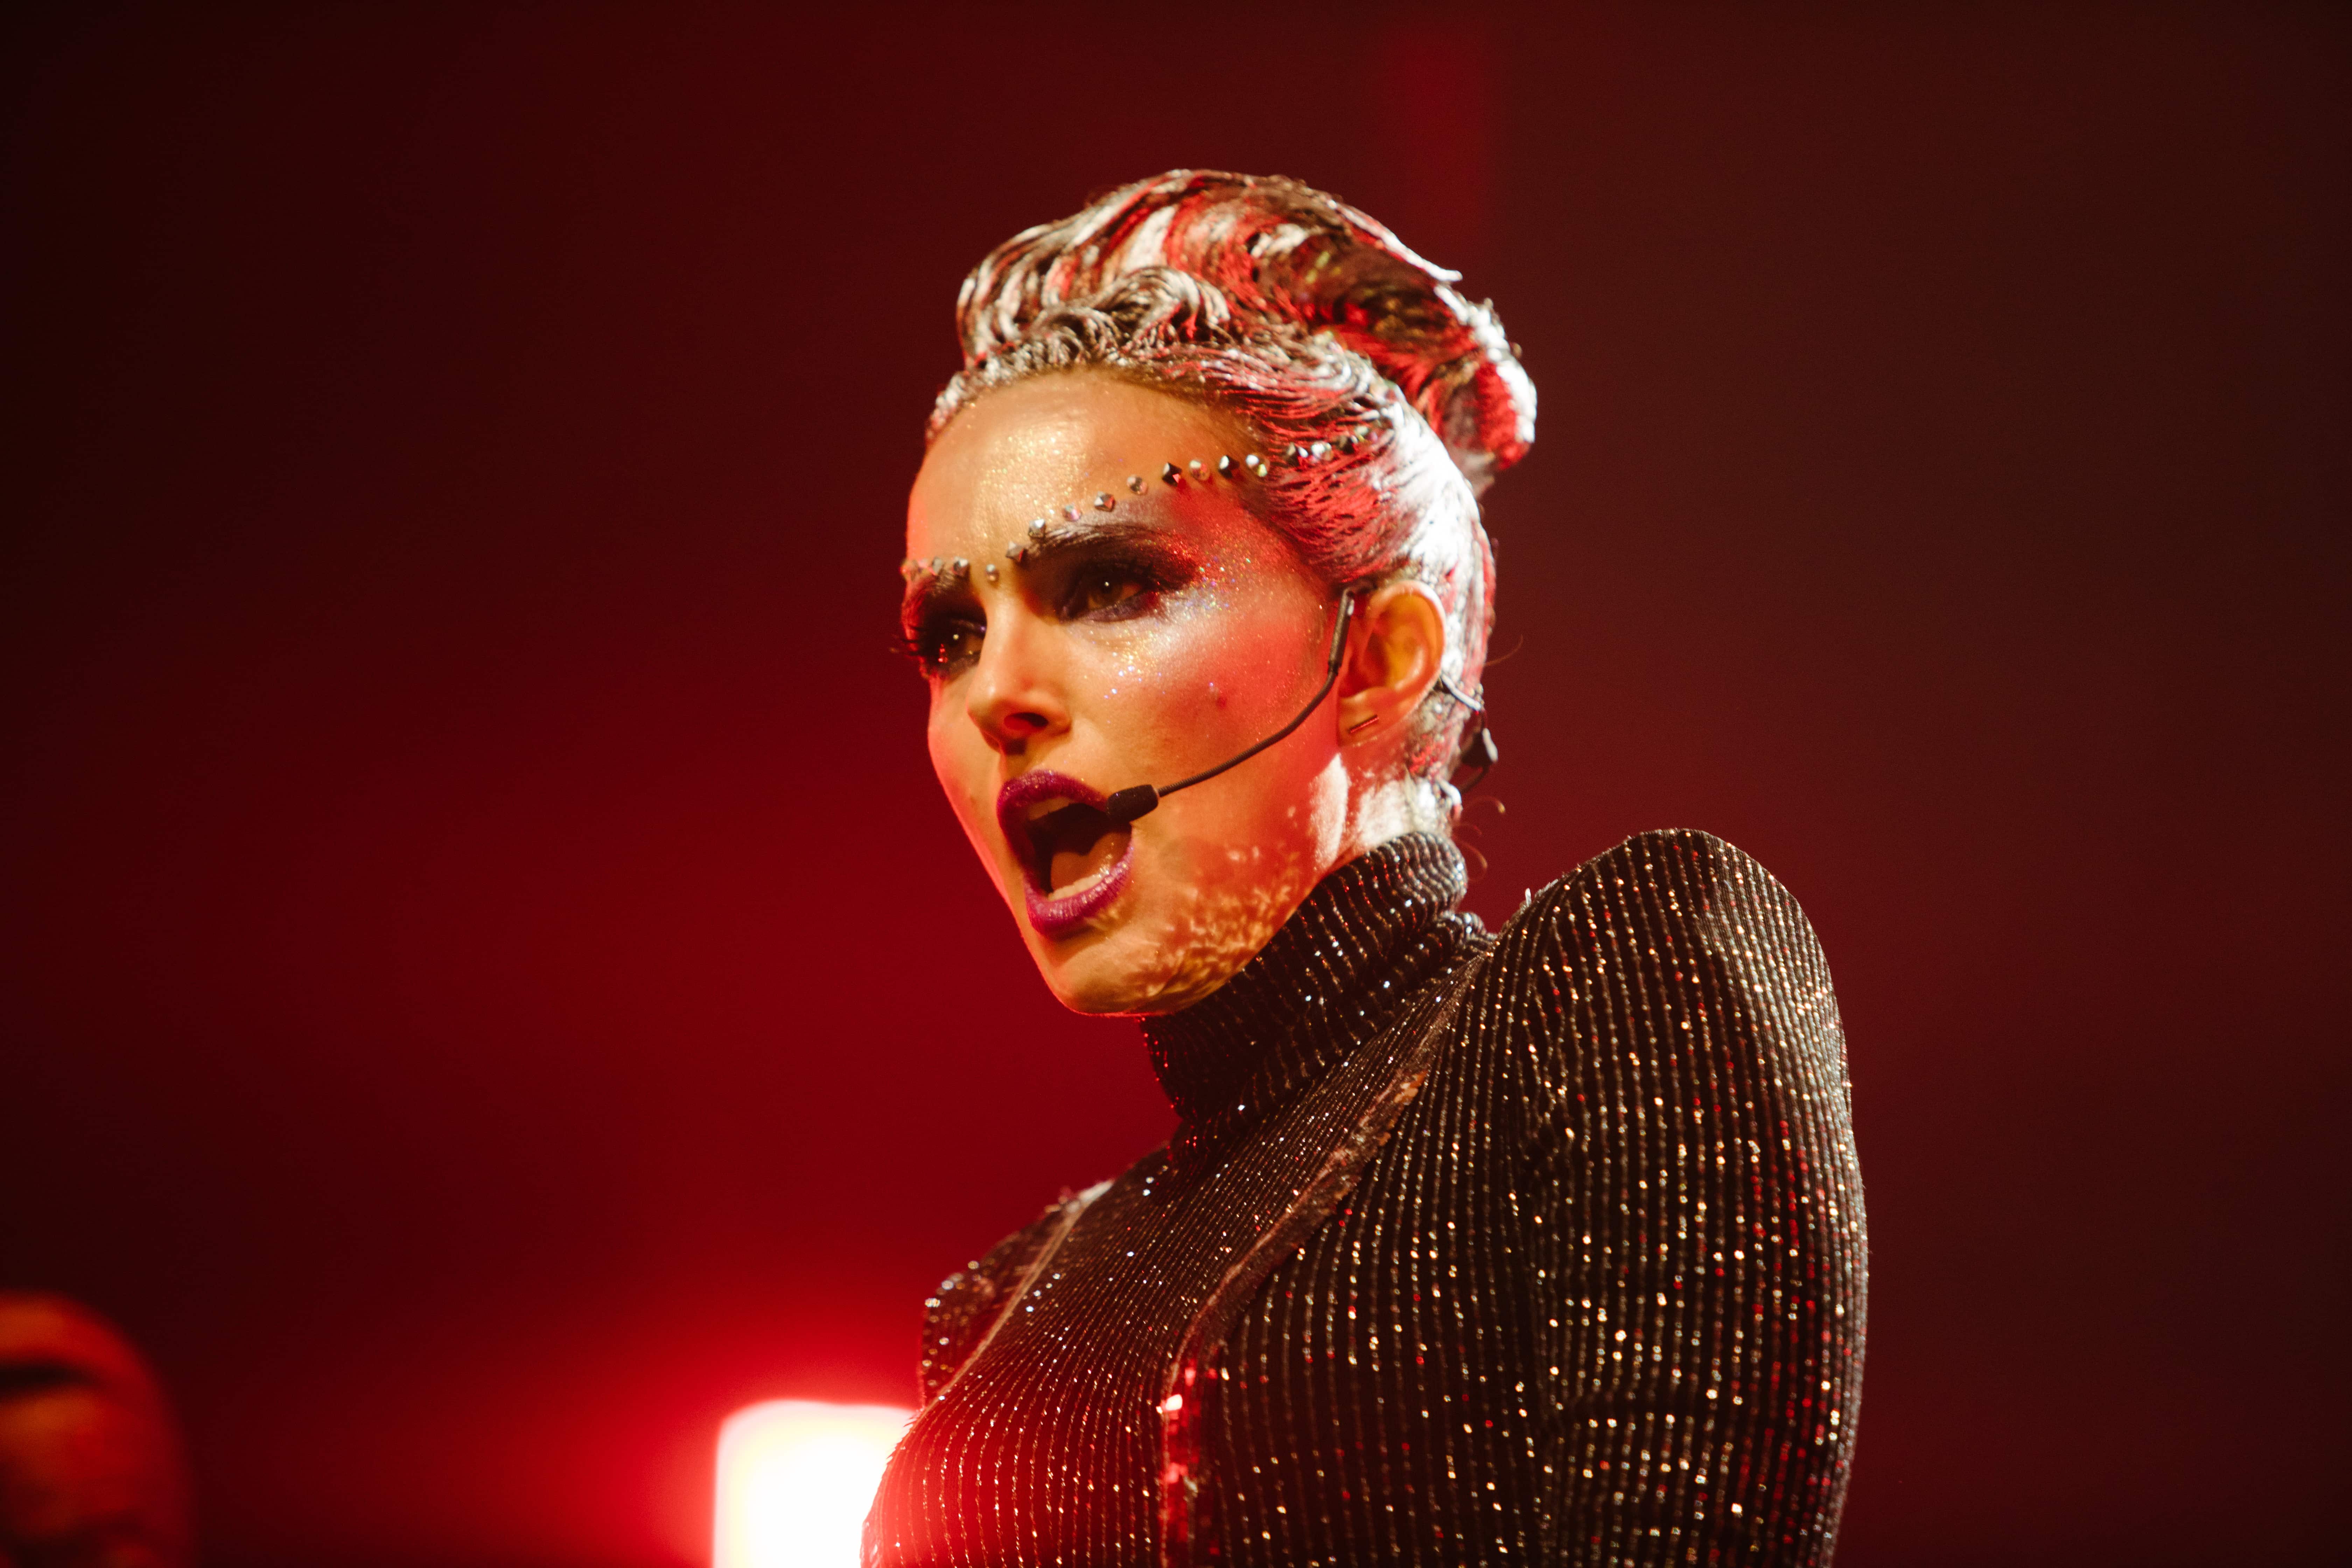 Vox Lux and the Scandi-pop collaborations that changed the landscape of music